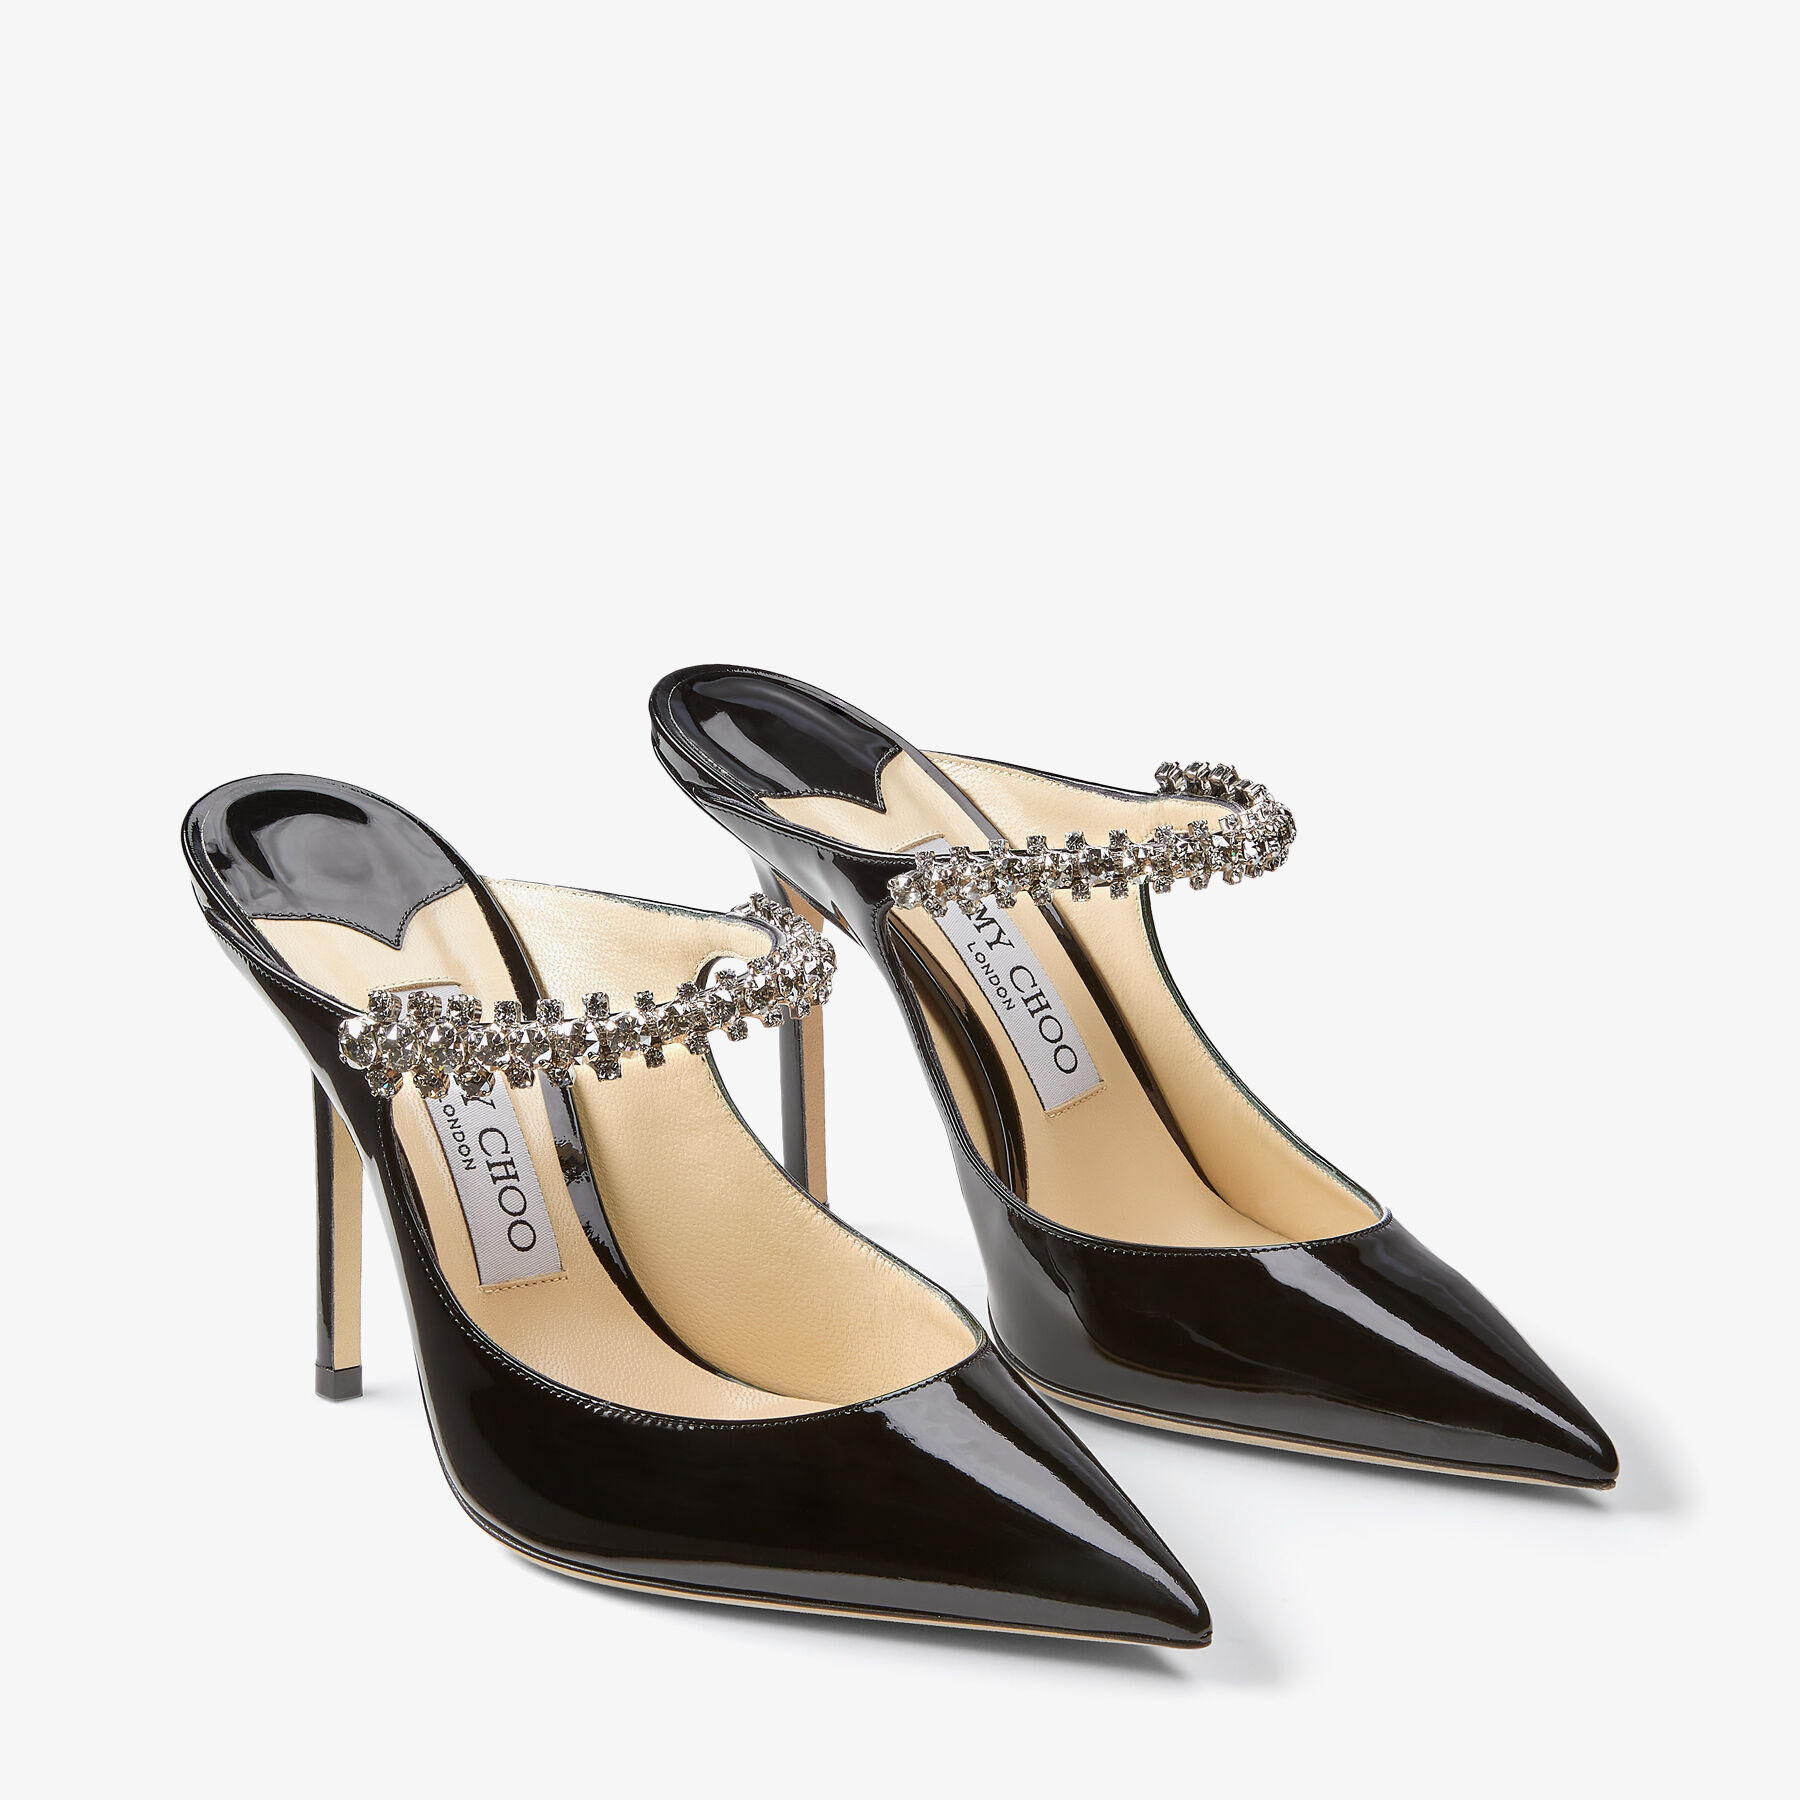 Bing 100 | Black Patent Leather Mules with Crystal Strap | JIMMY CHOO